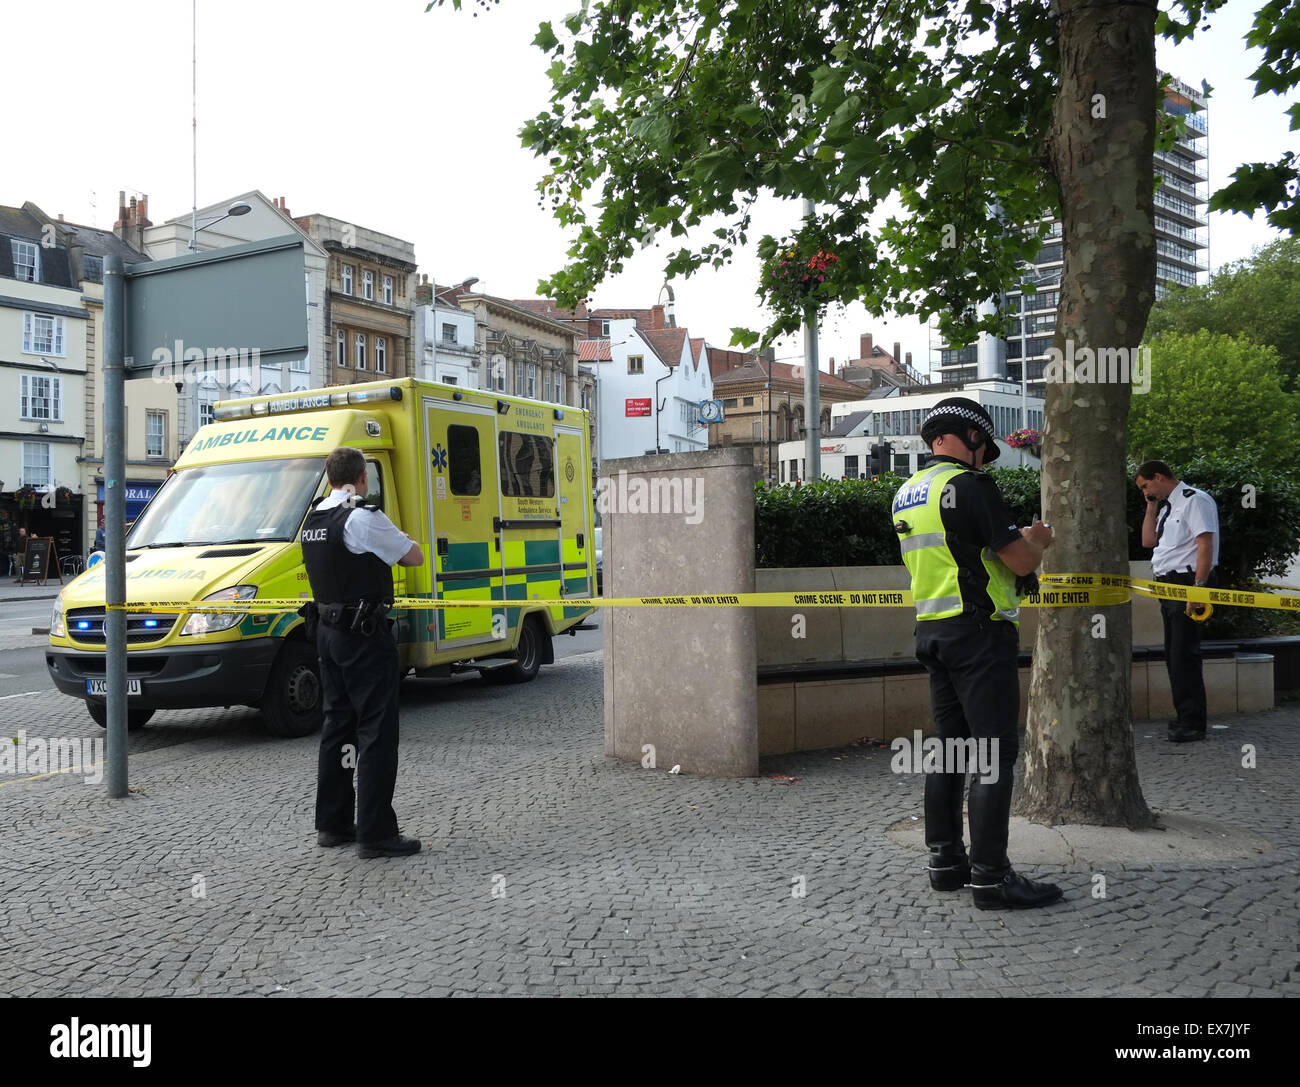 July 2015 - Police and Ambulance attending an incident at Colston Square, Bristol, England, UK. Stock Photo